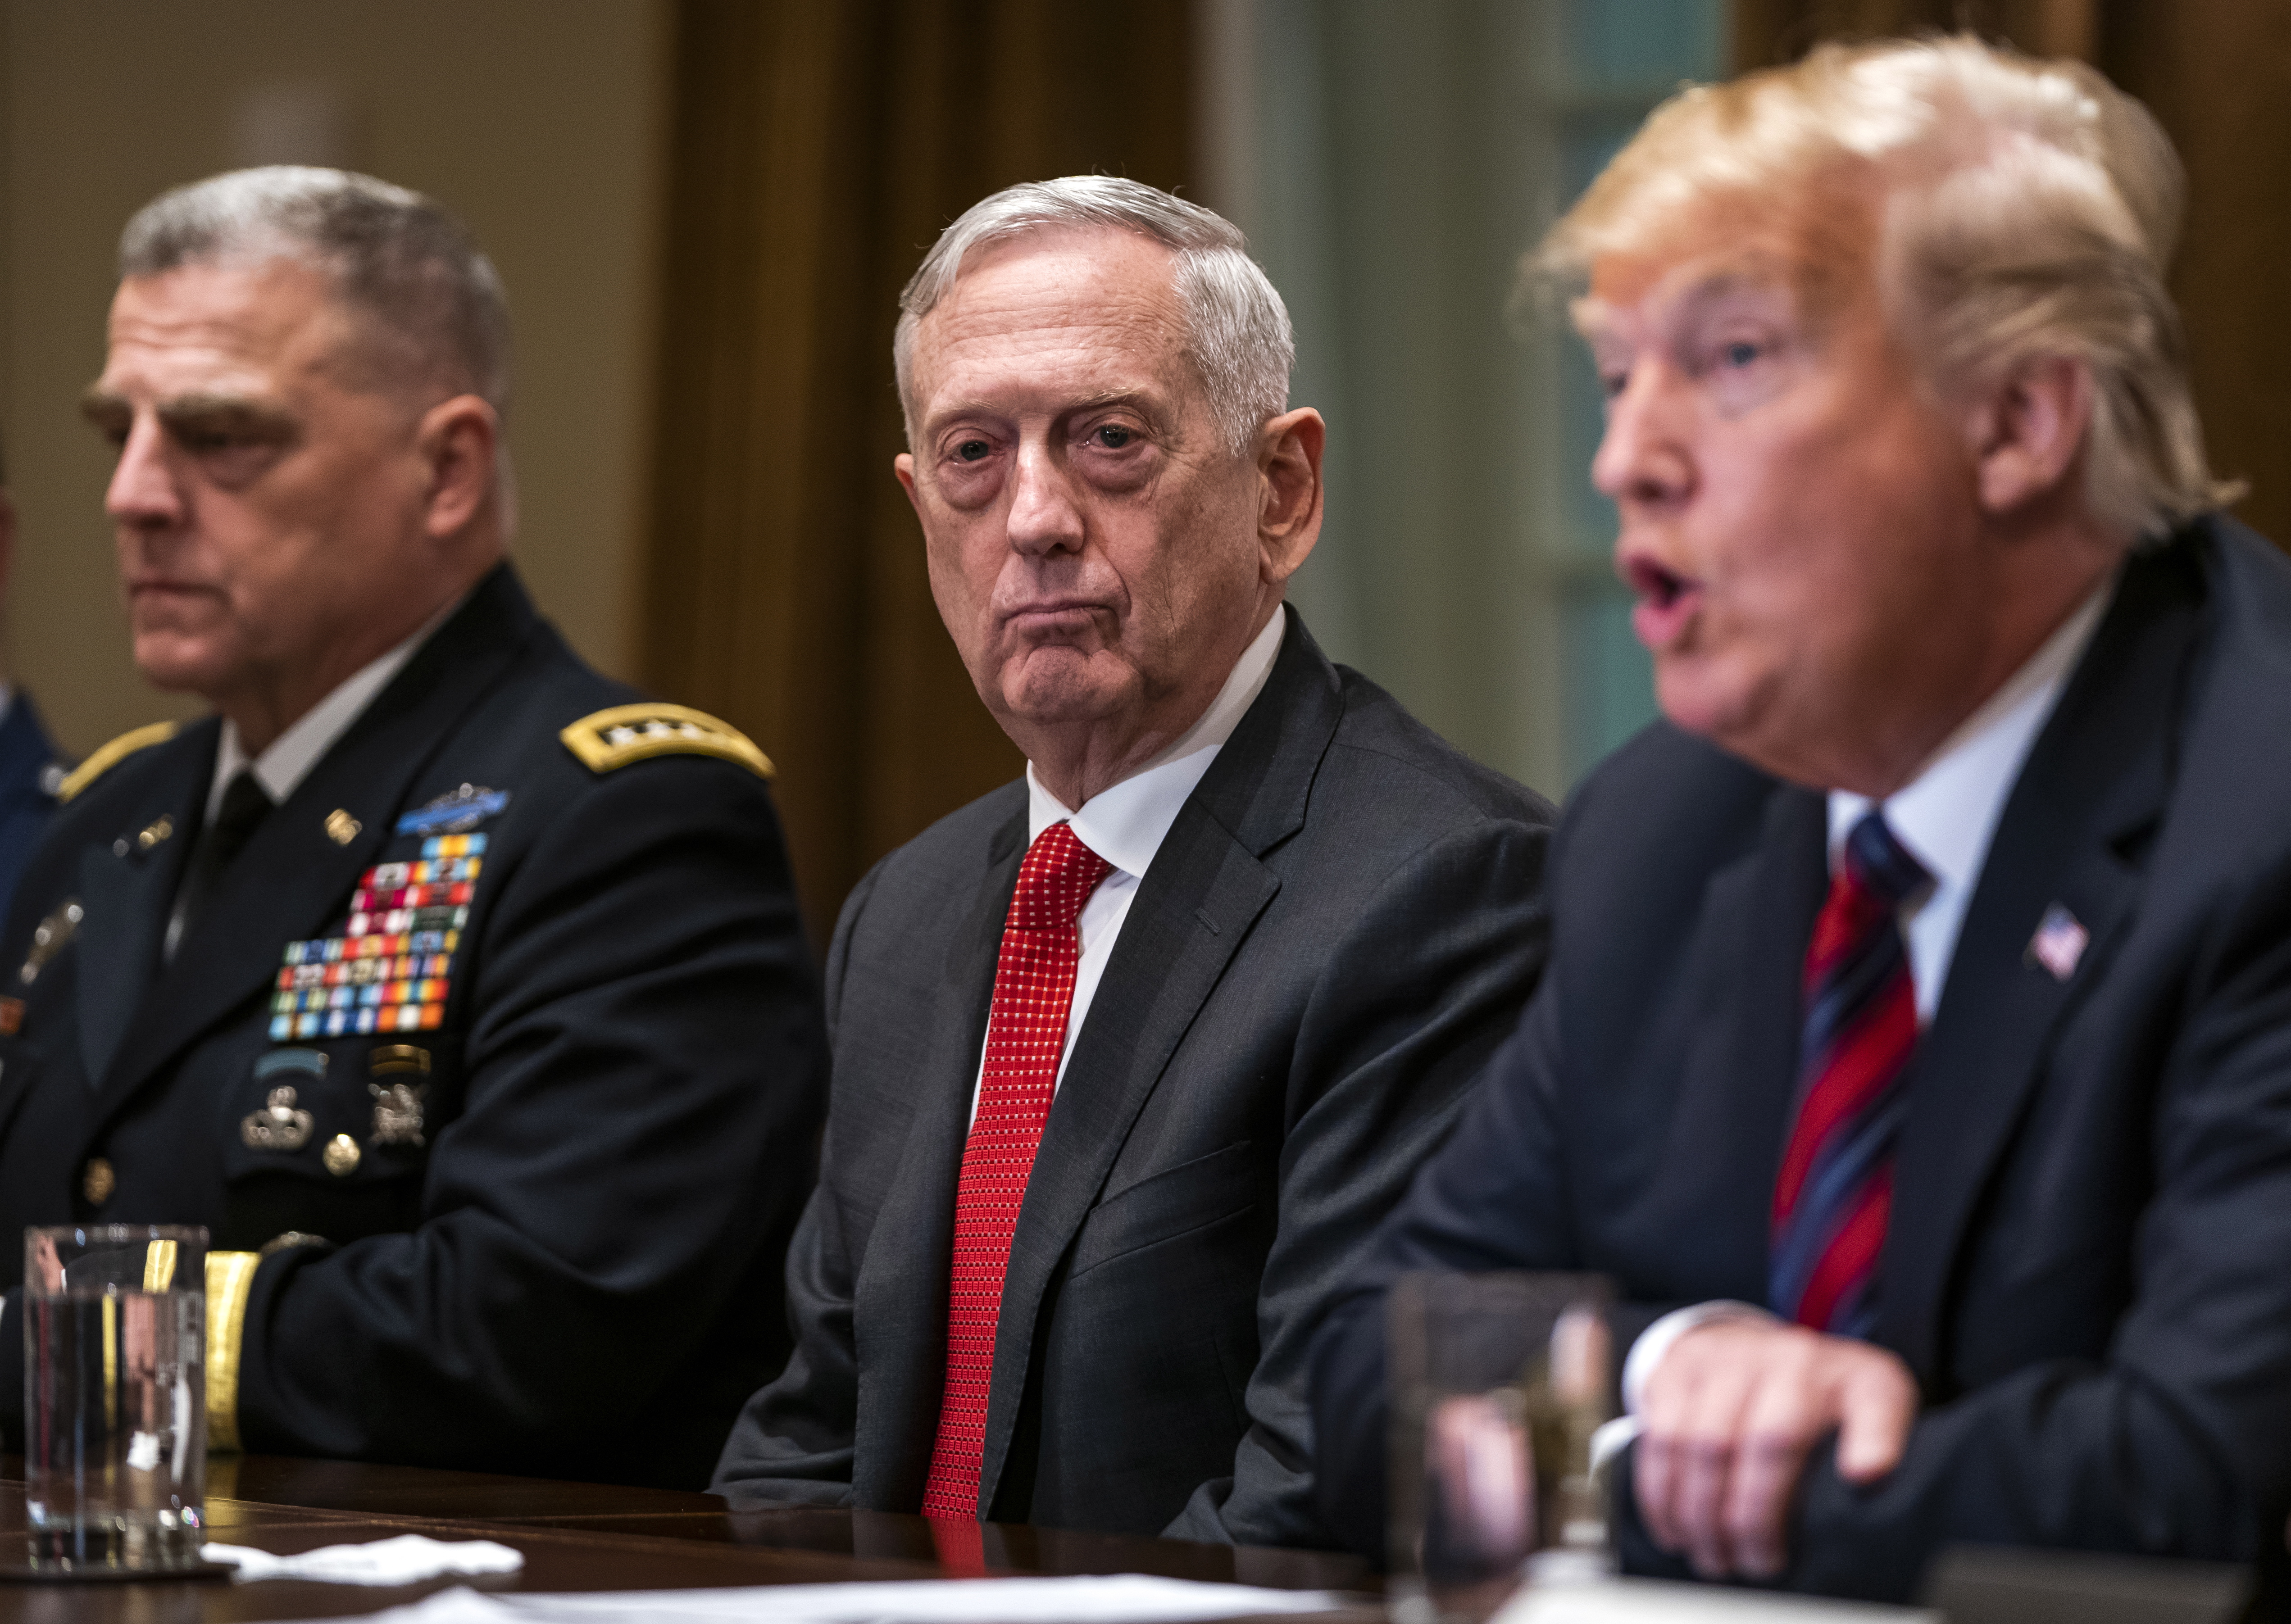 epa07242840 (FILE) - US Defense Secretary James Mattis (C) listens to President Donald J. Trump (R) speaking to the media before meeting with senior military advisors in the Cabinet Room of the White House in Washington, DC, USA, 23 October 2018 (re-issued 20 December 2018). Media reports on 20 December 2018 state that US Secretary of Defense James Mattis is retiring at the end of February 2019 citing the announcment from a tweet by US President Donald J. Trump.  EPA/JIM LO SCALZO